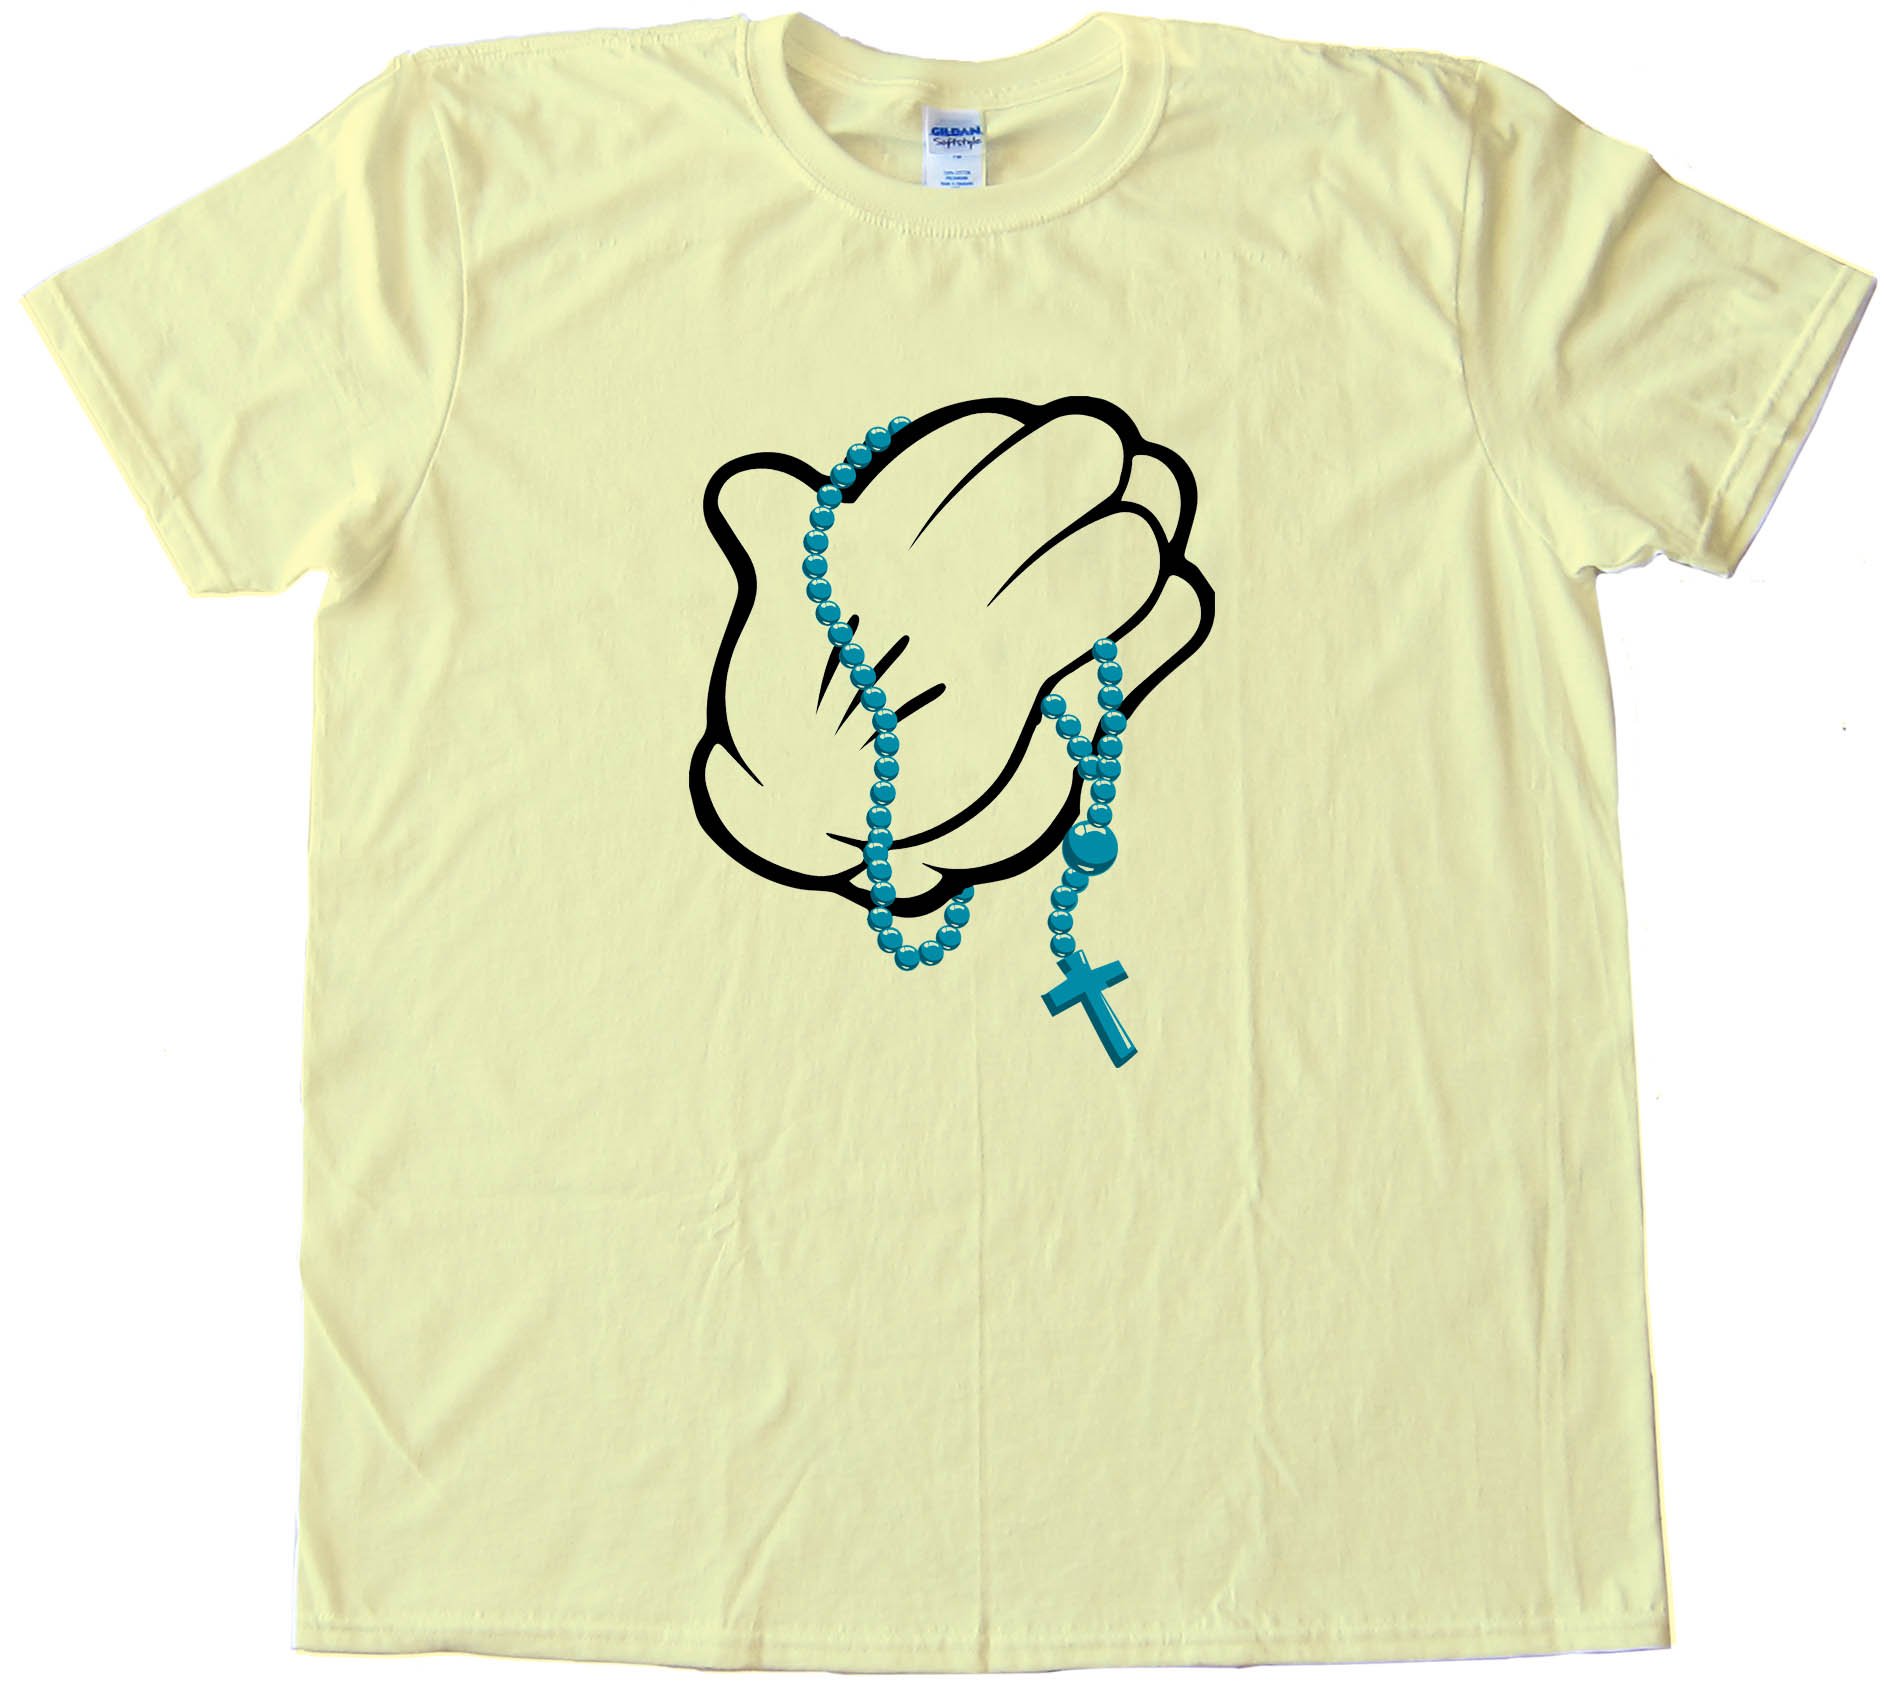 Praying Hands Mickey Mouse Style - Tee Shirt